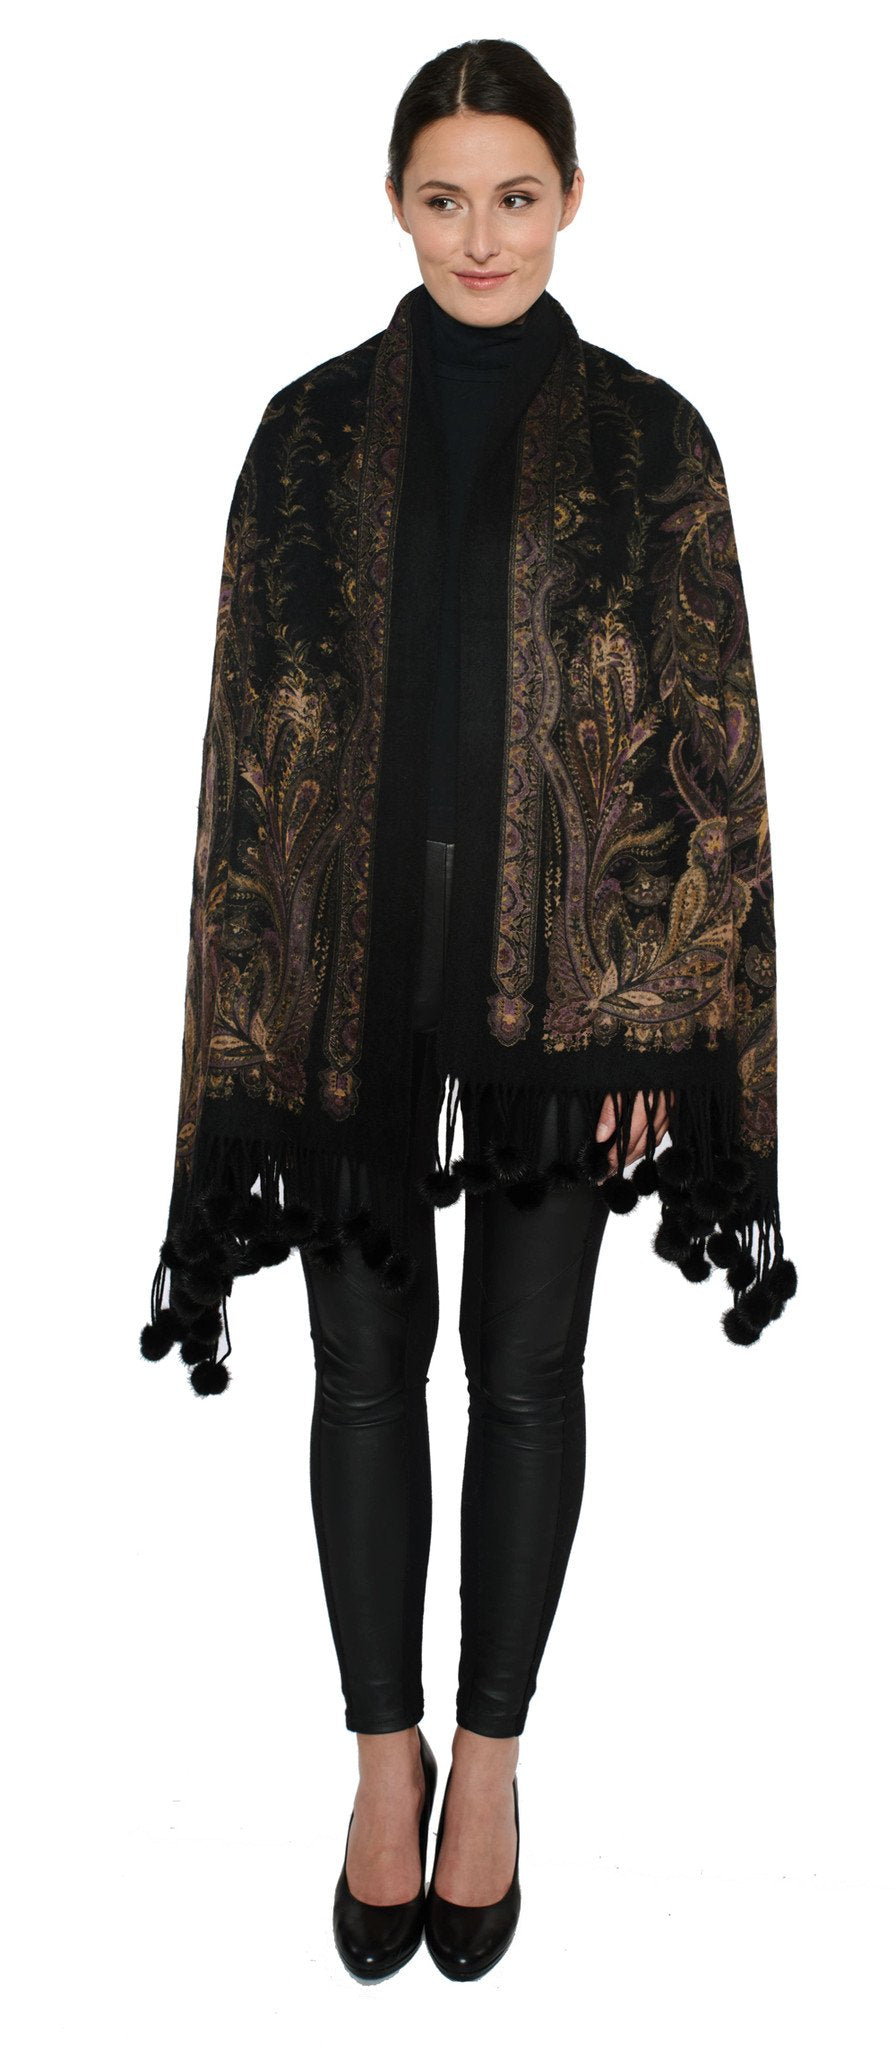 THE RYE Cashmere Reversible Paisley Wrap with Mink Fur Poms - paulamariecollection